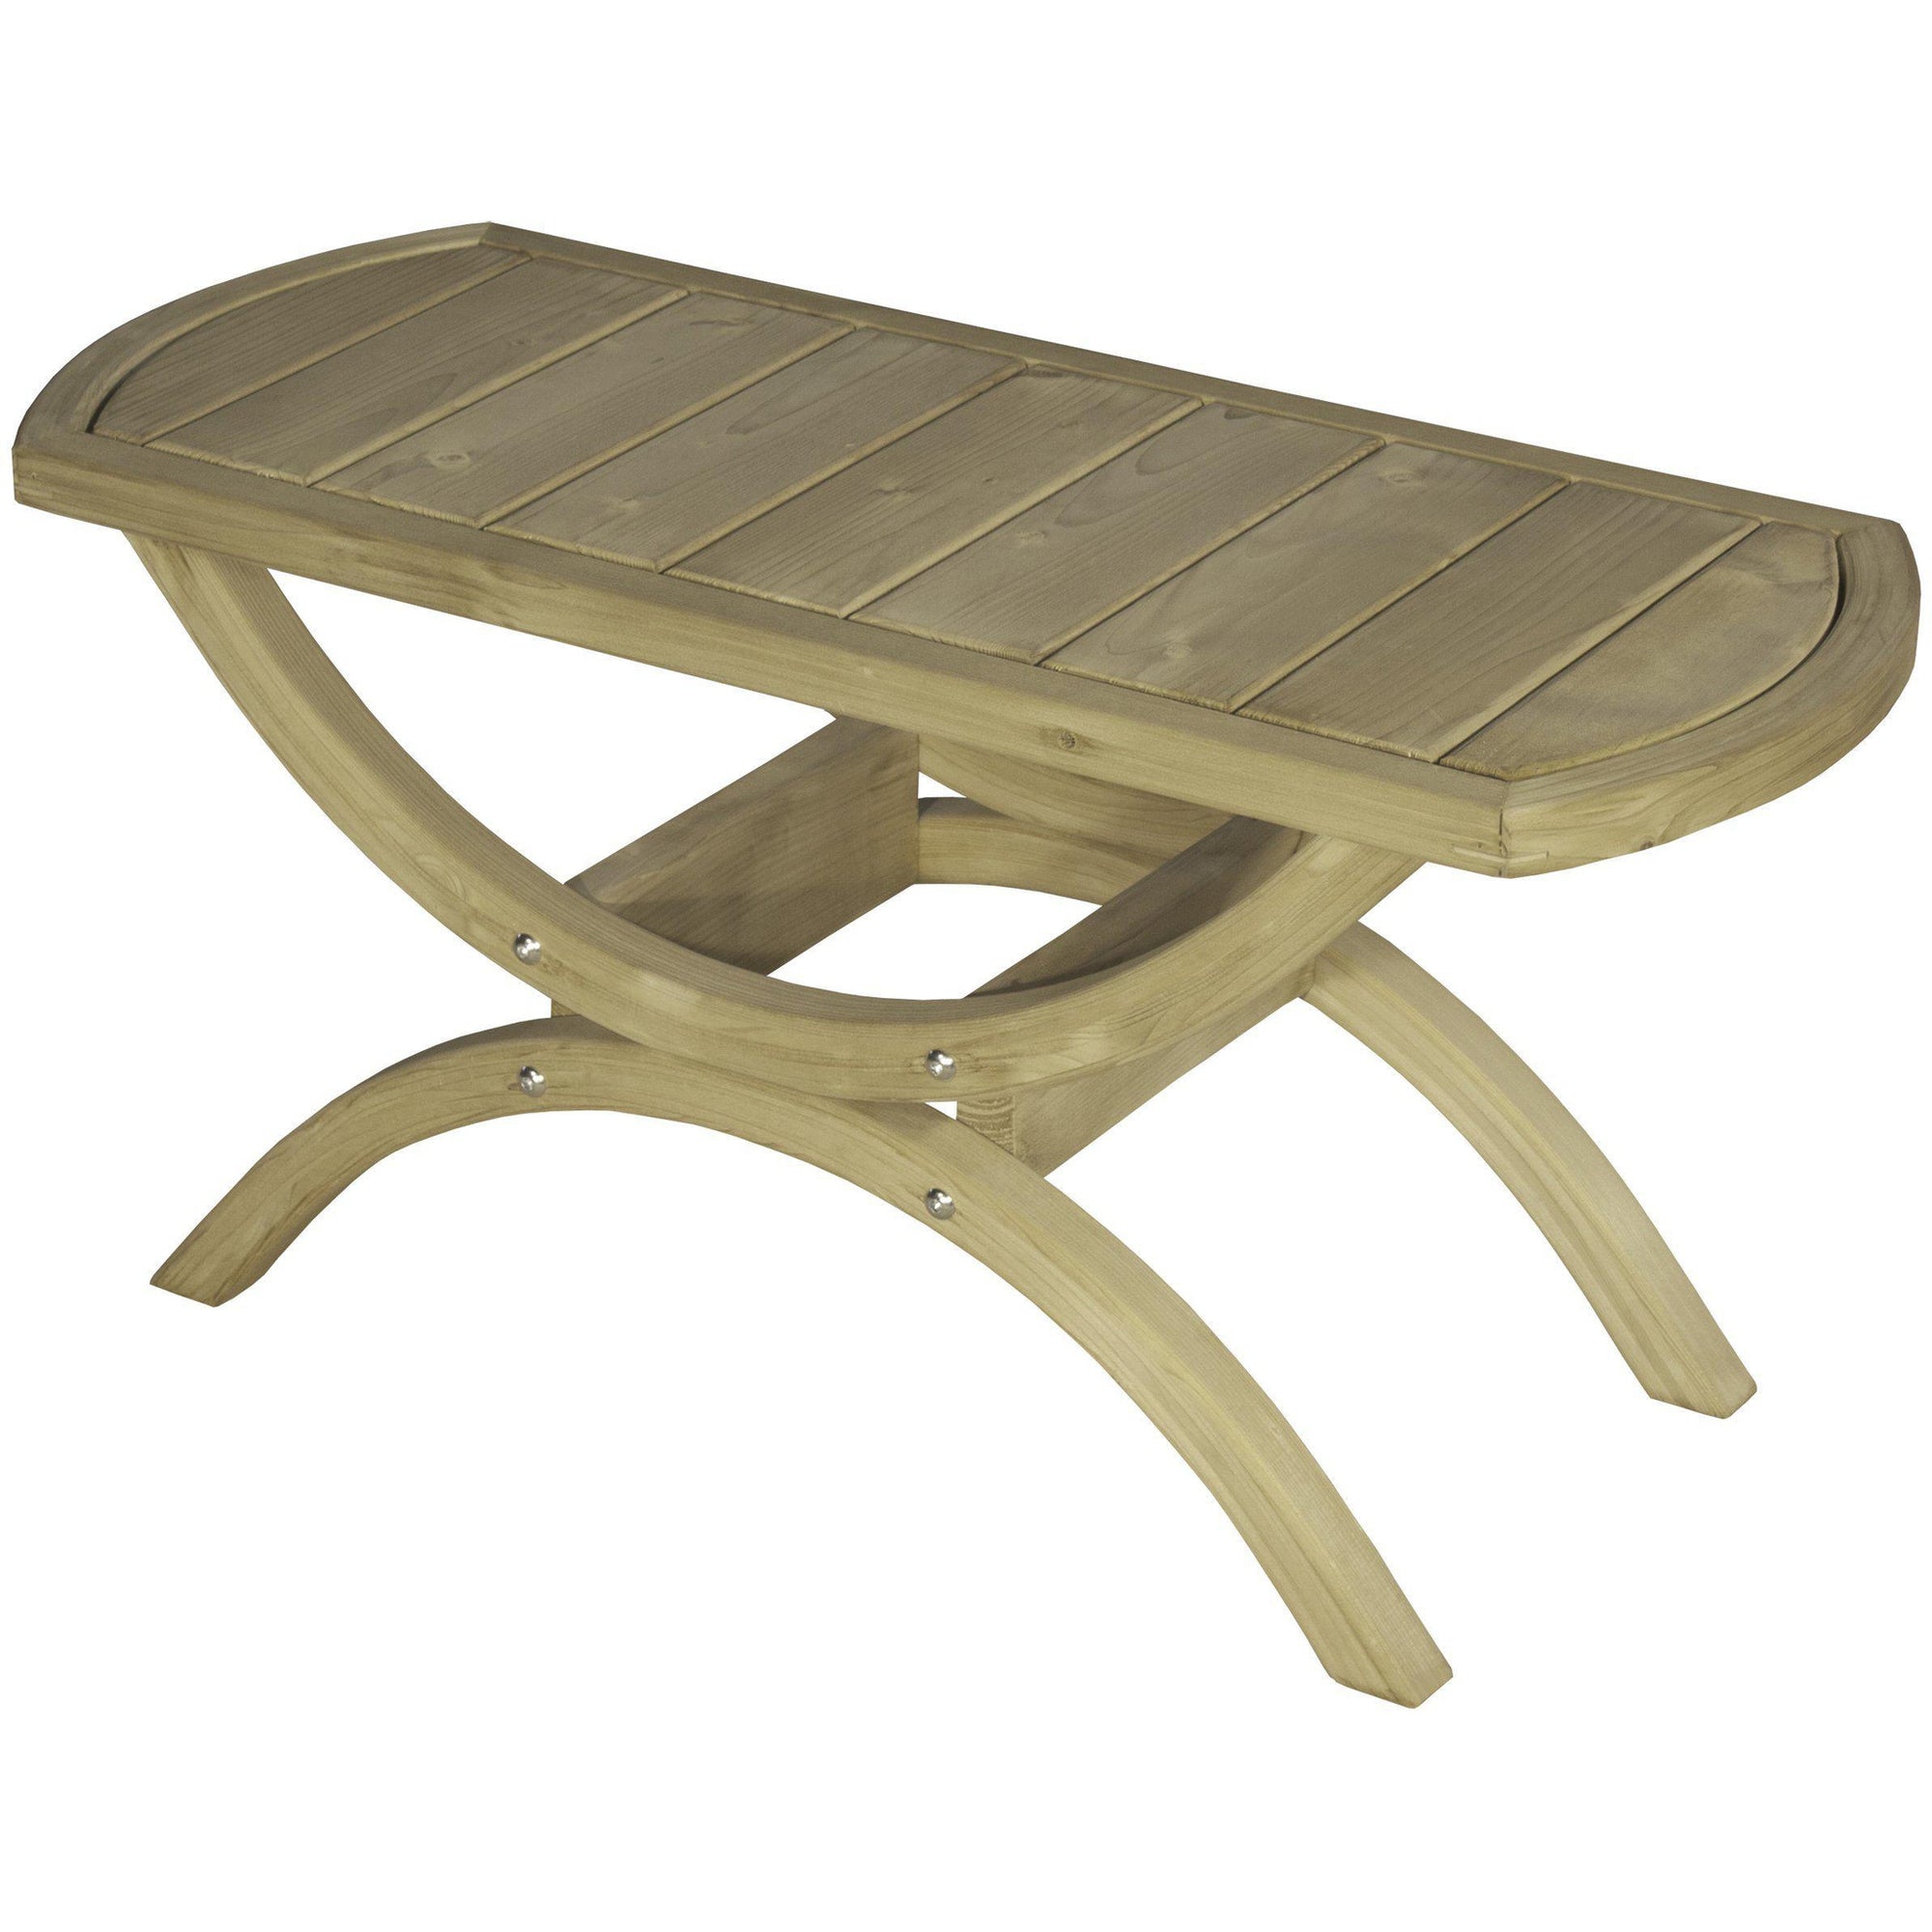 Tavolino Table, from Byer of Maine